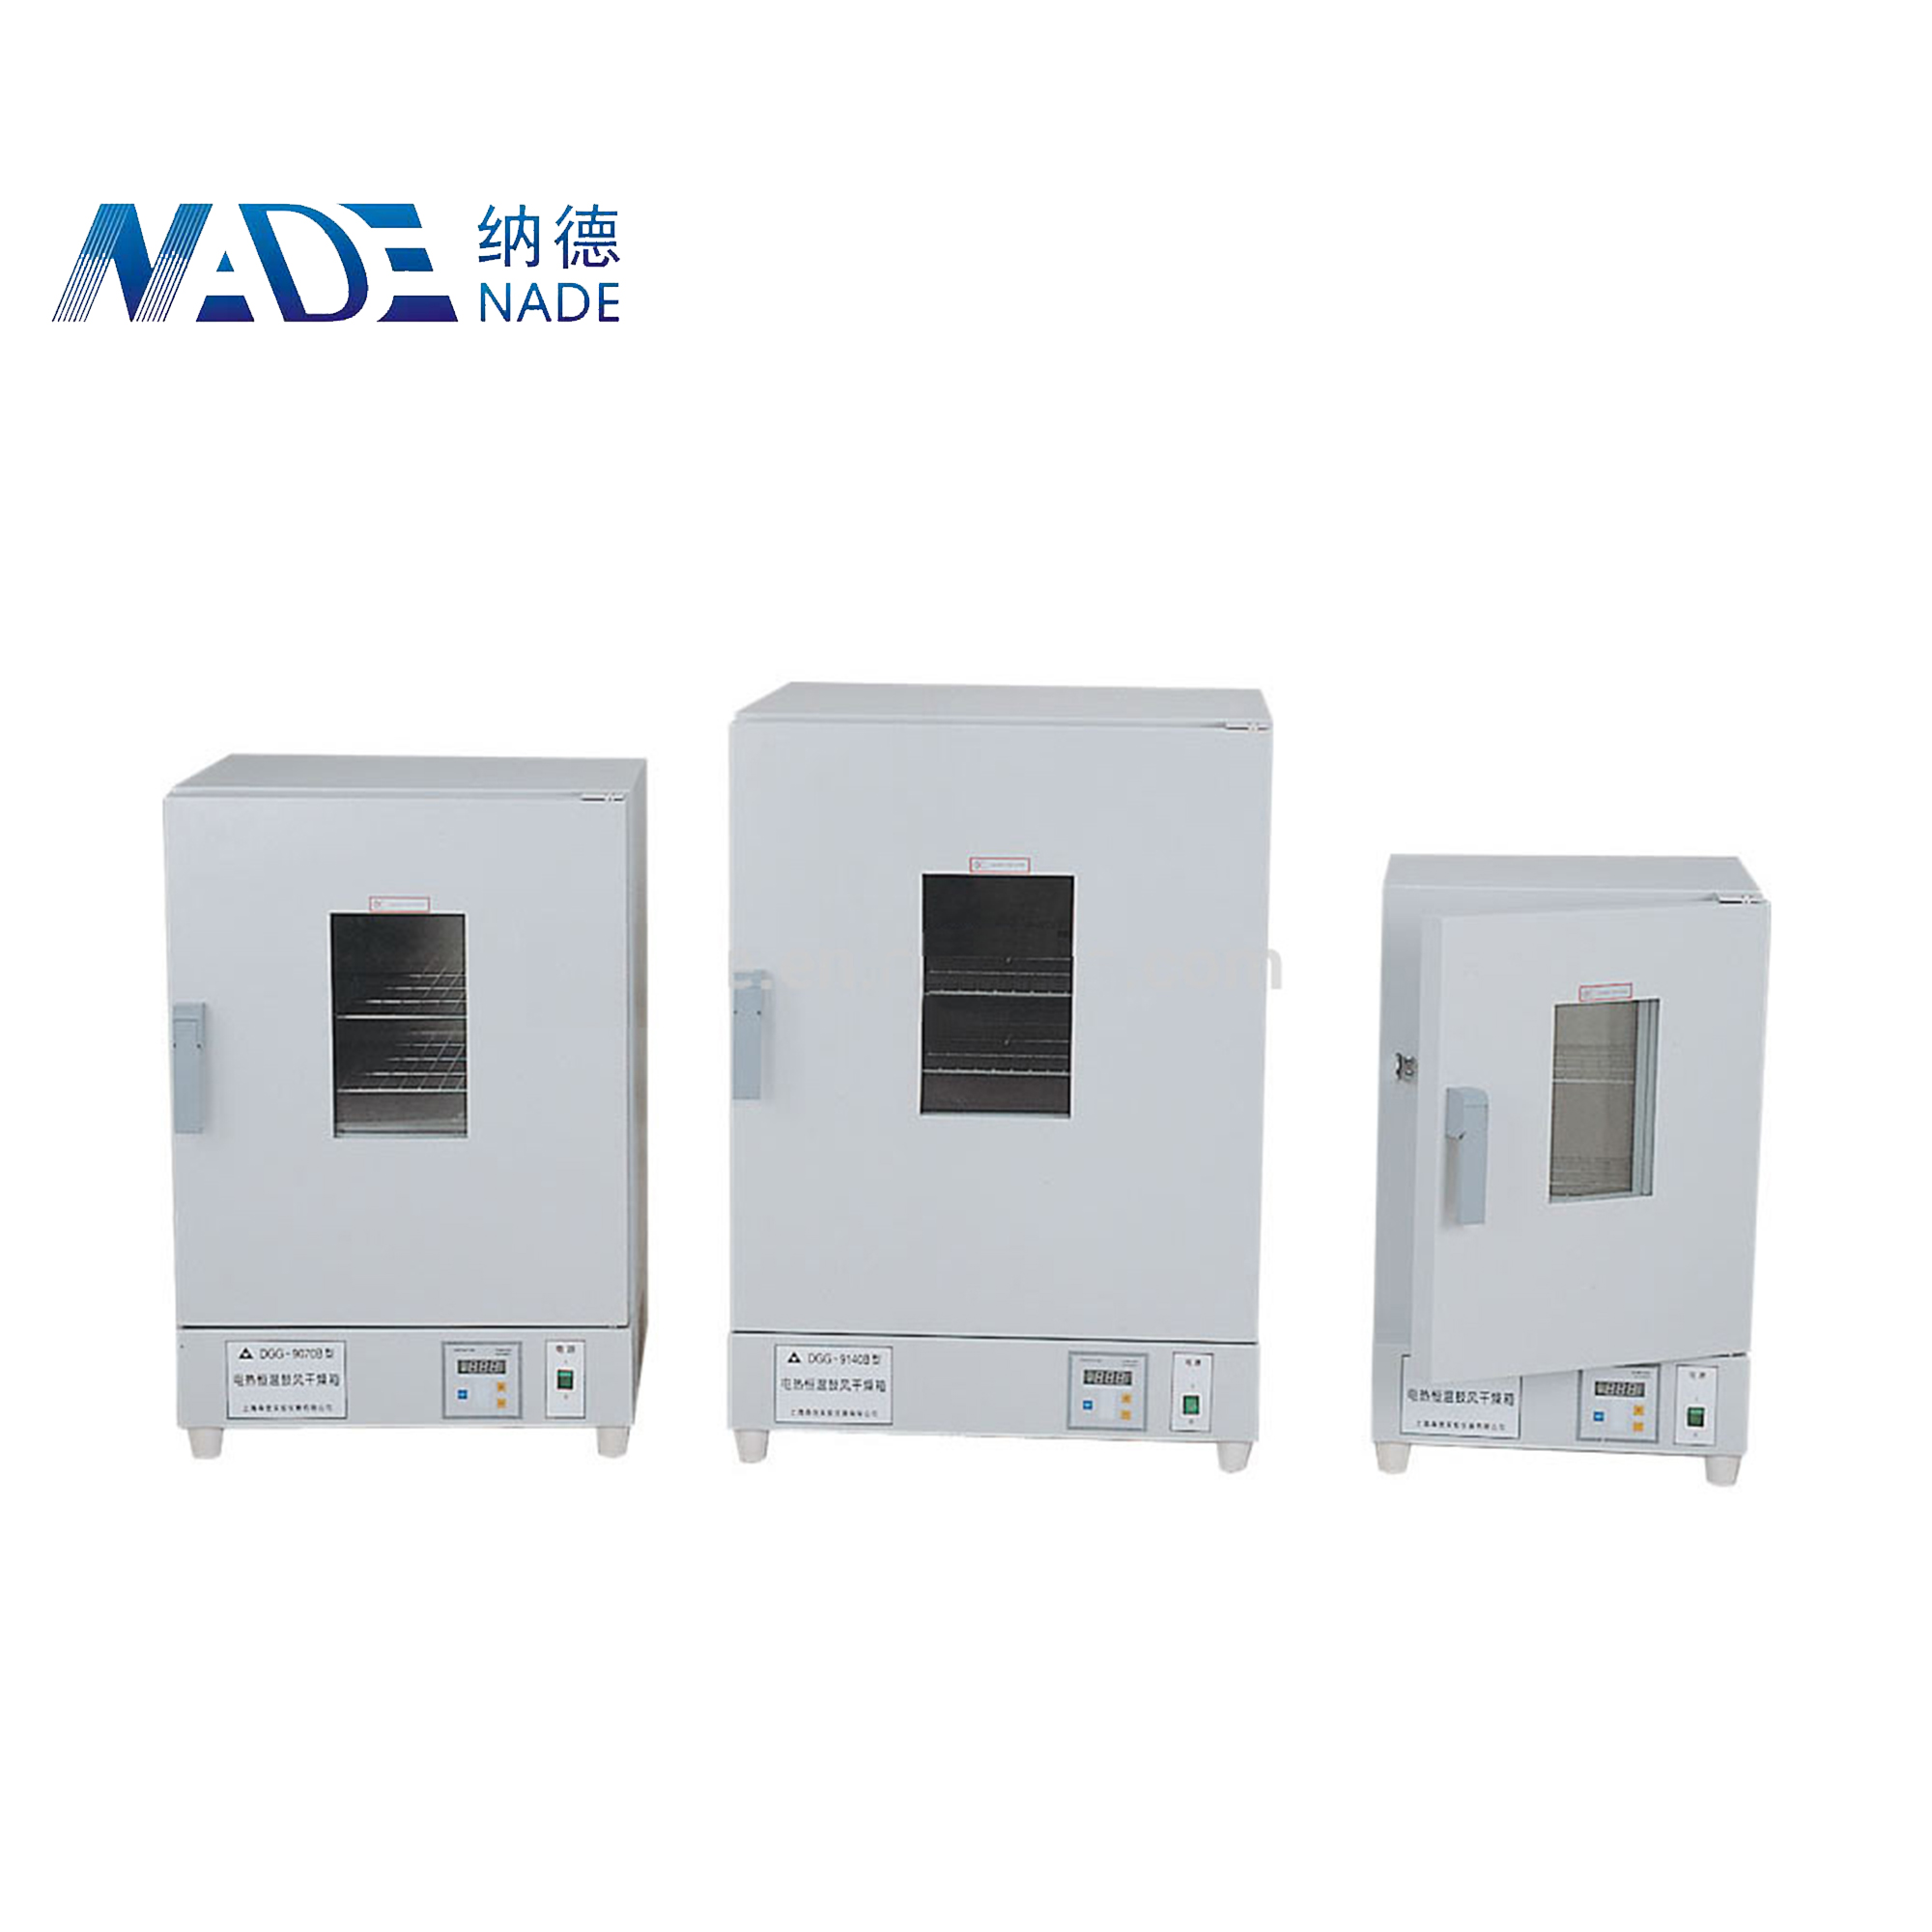 Nade Lab Drying Equipment CE Marked Conventional Oven and Drying Oven DGG-9030ADH 30L +10-200 C